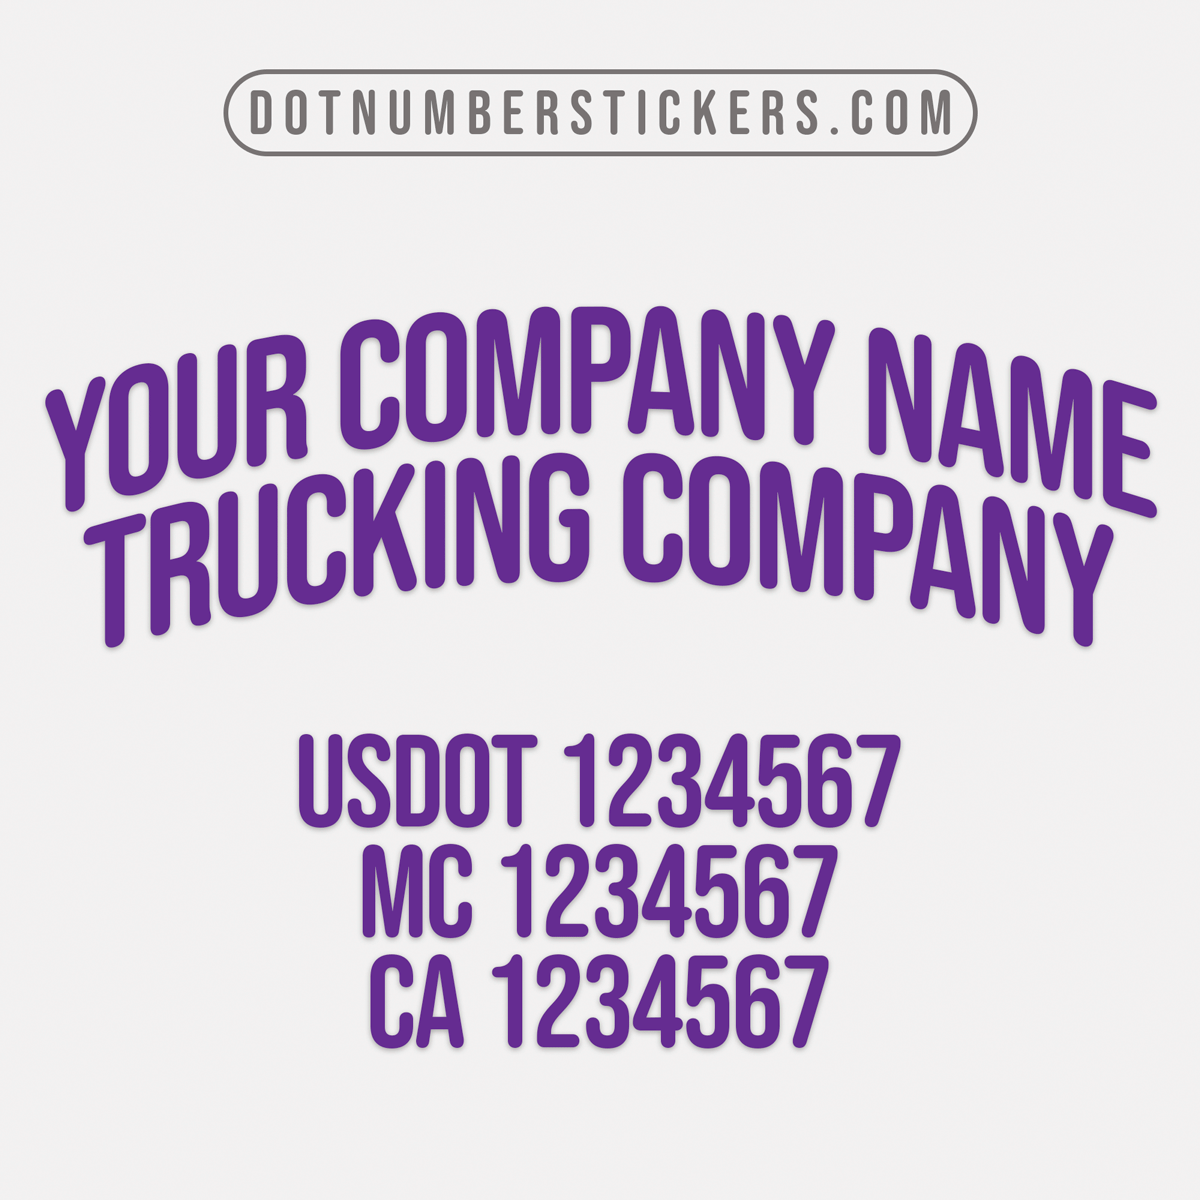 arched company name decal with usdot, mc, ca